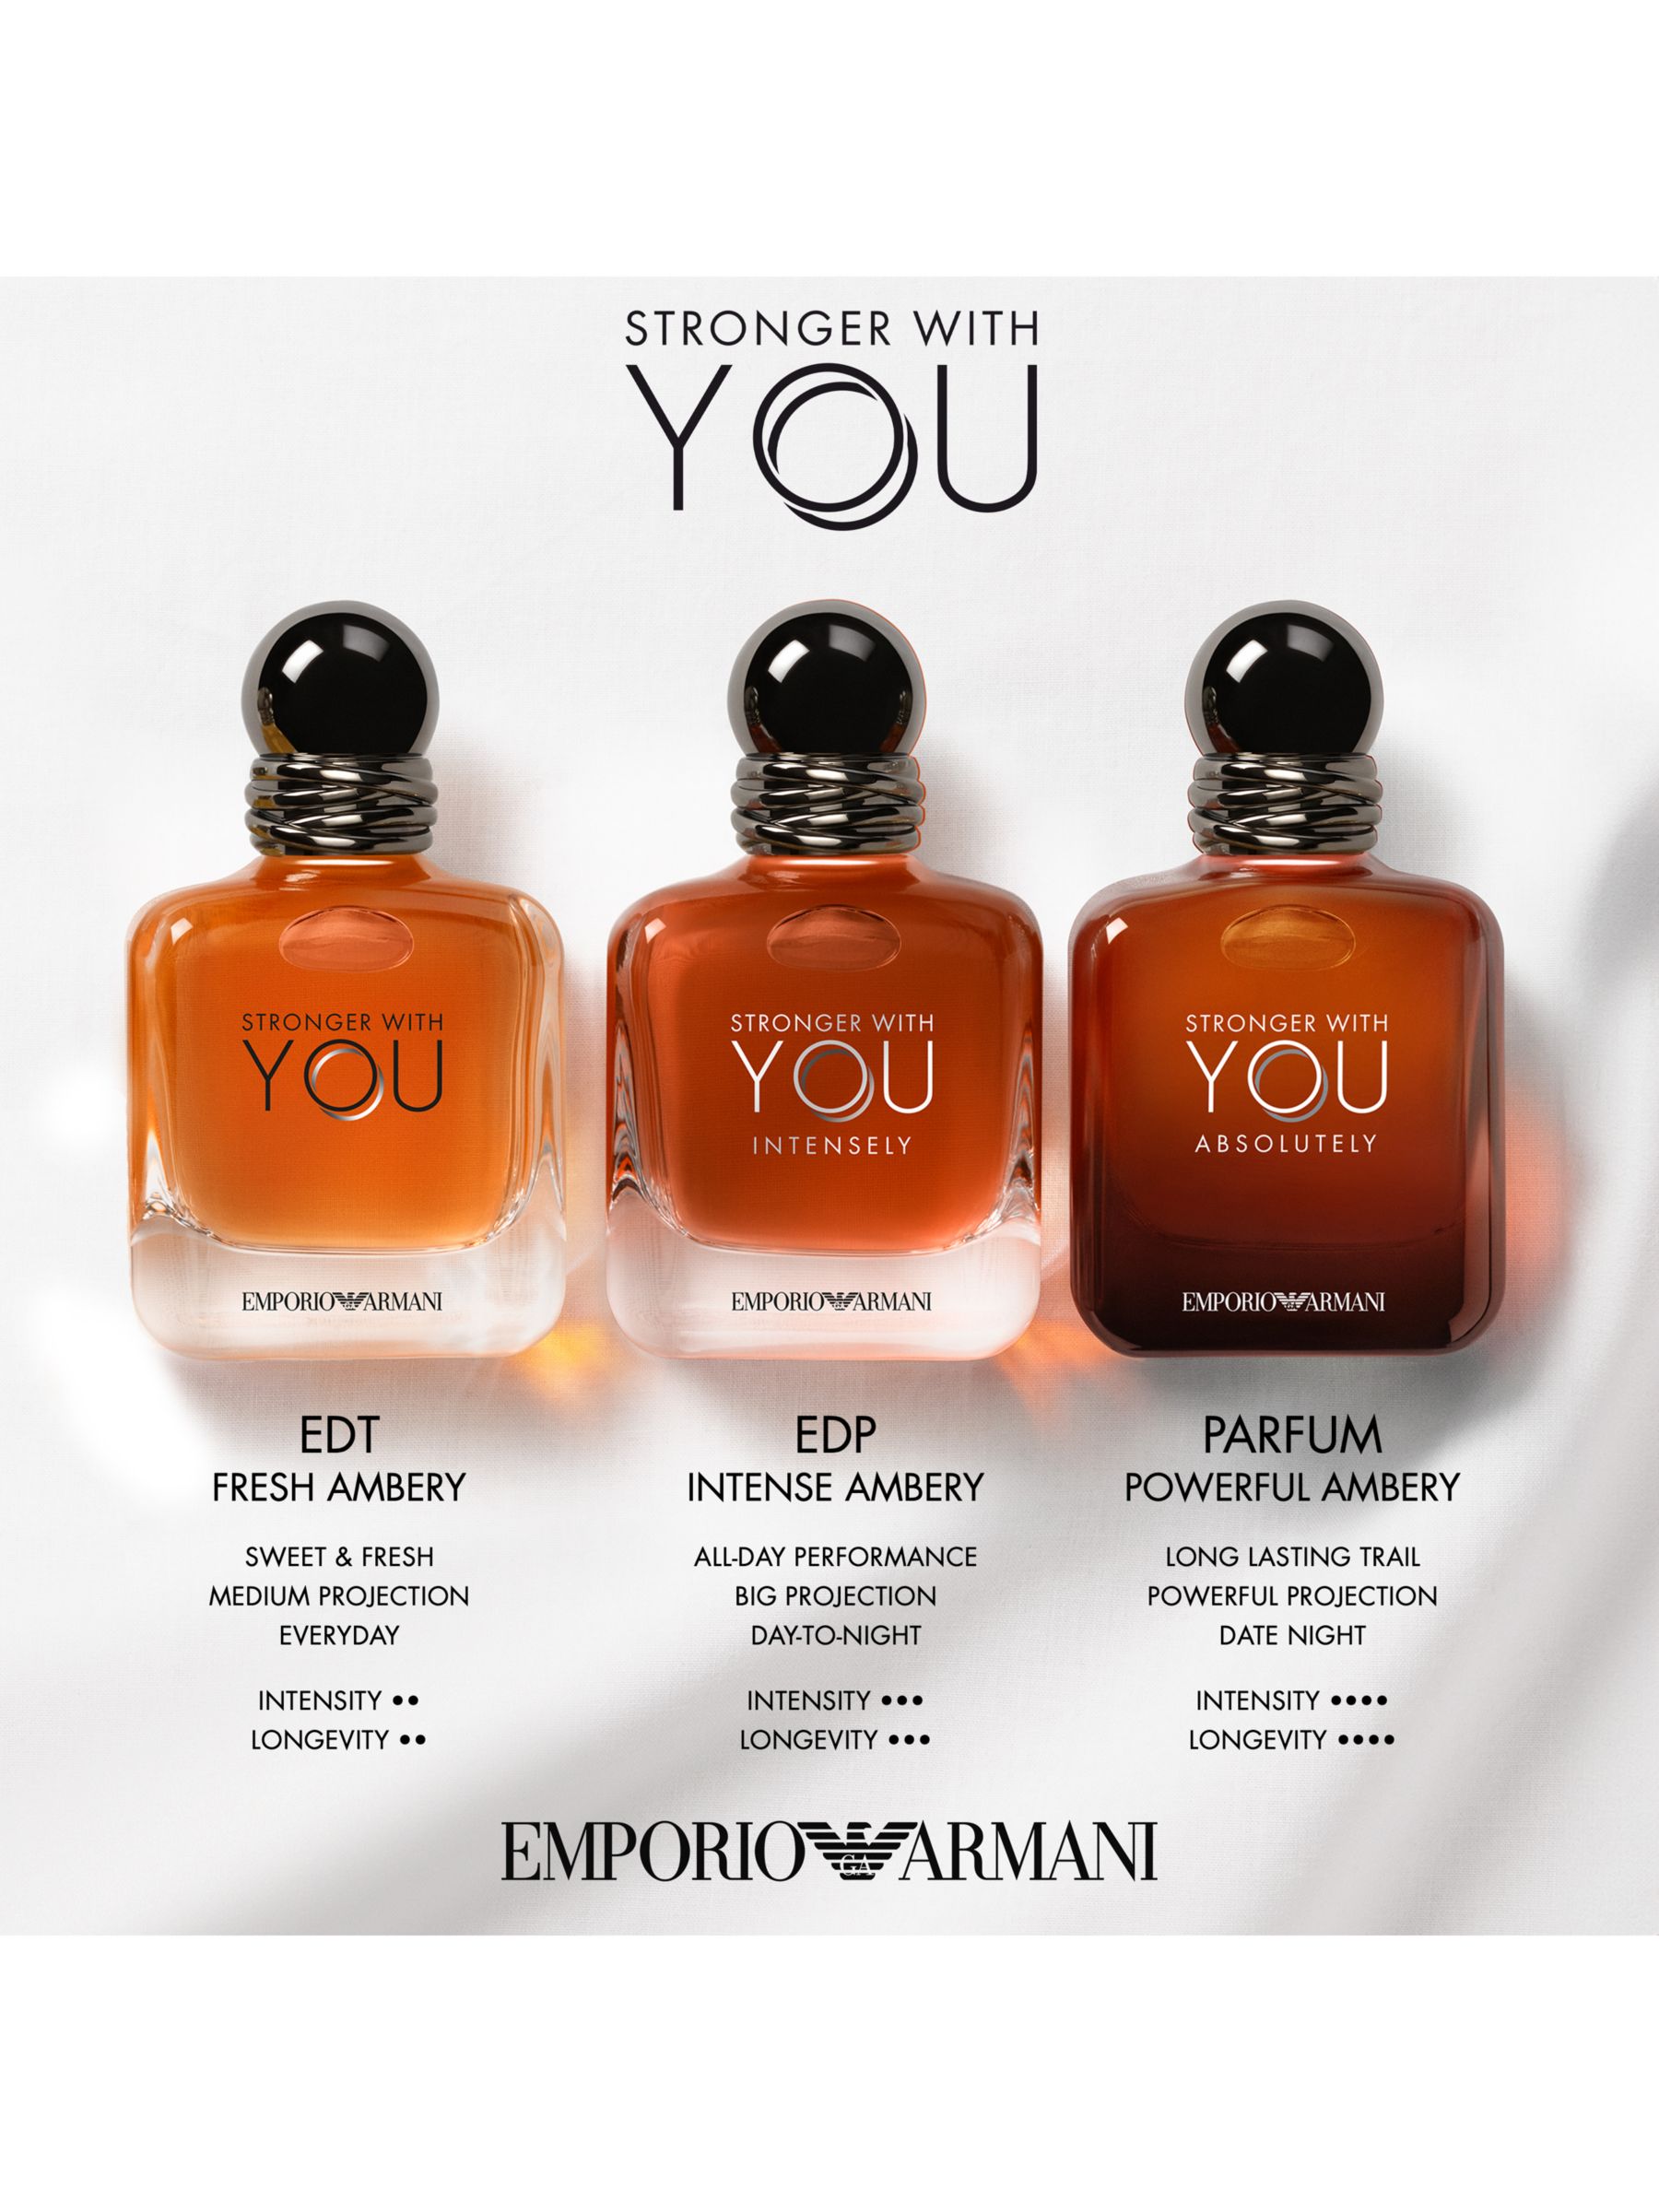 Emporio Armani Stronger With You Absolutely Parfum, 100ml 3